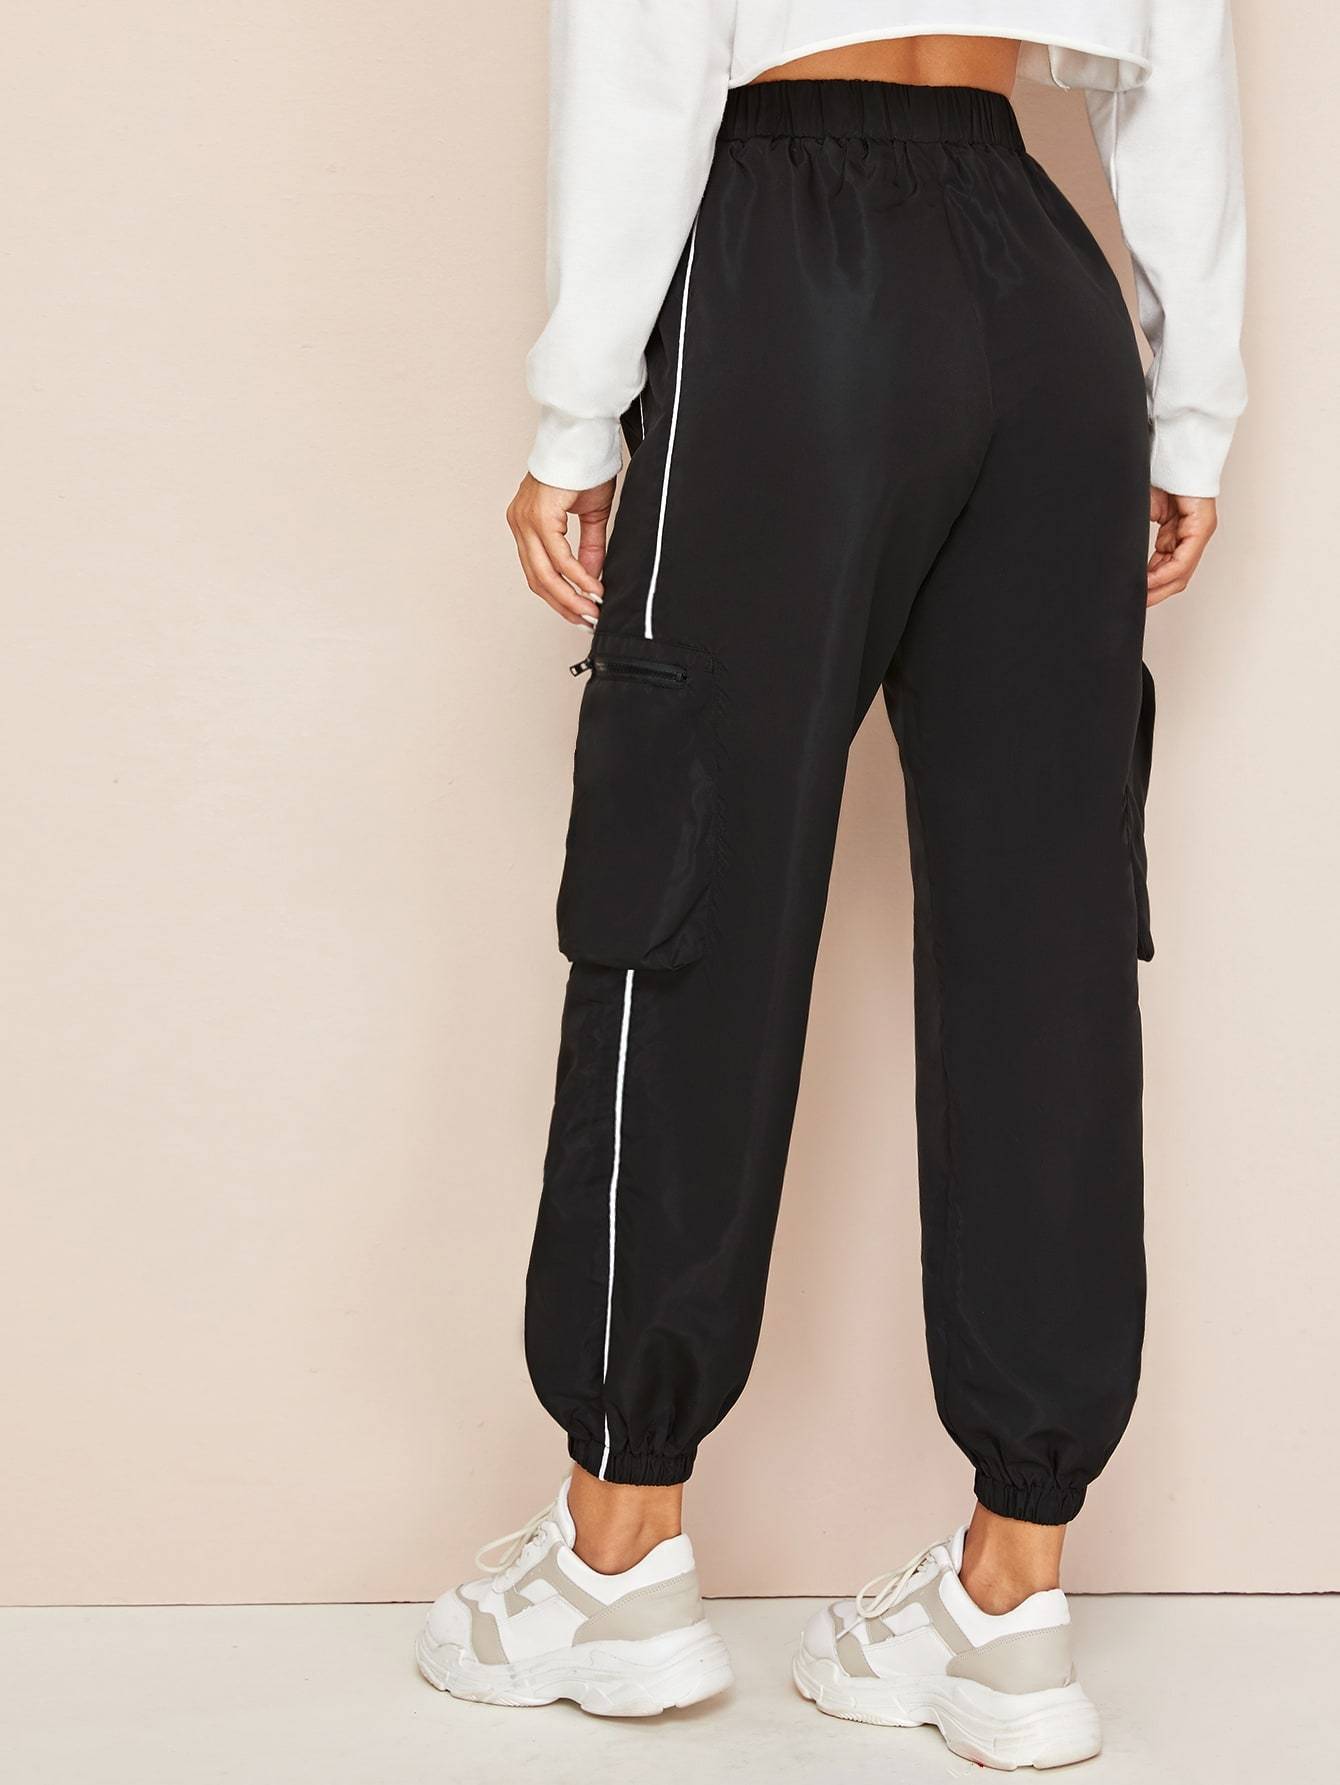 Budge Track Casual Pants For Men And Women Loose Fit Joggers With Side  Pockets M 2XL From Yefeng2, $32.36 | DHgate.Com